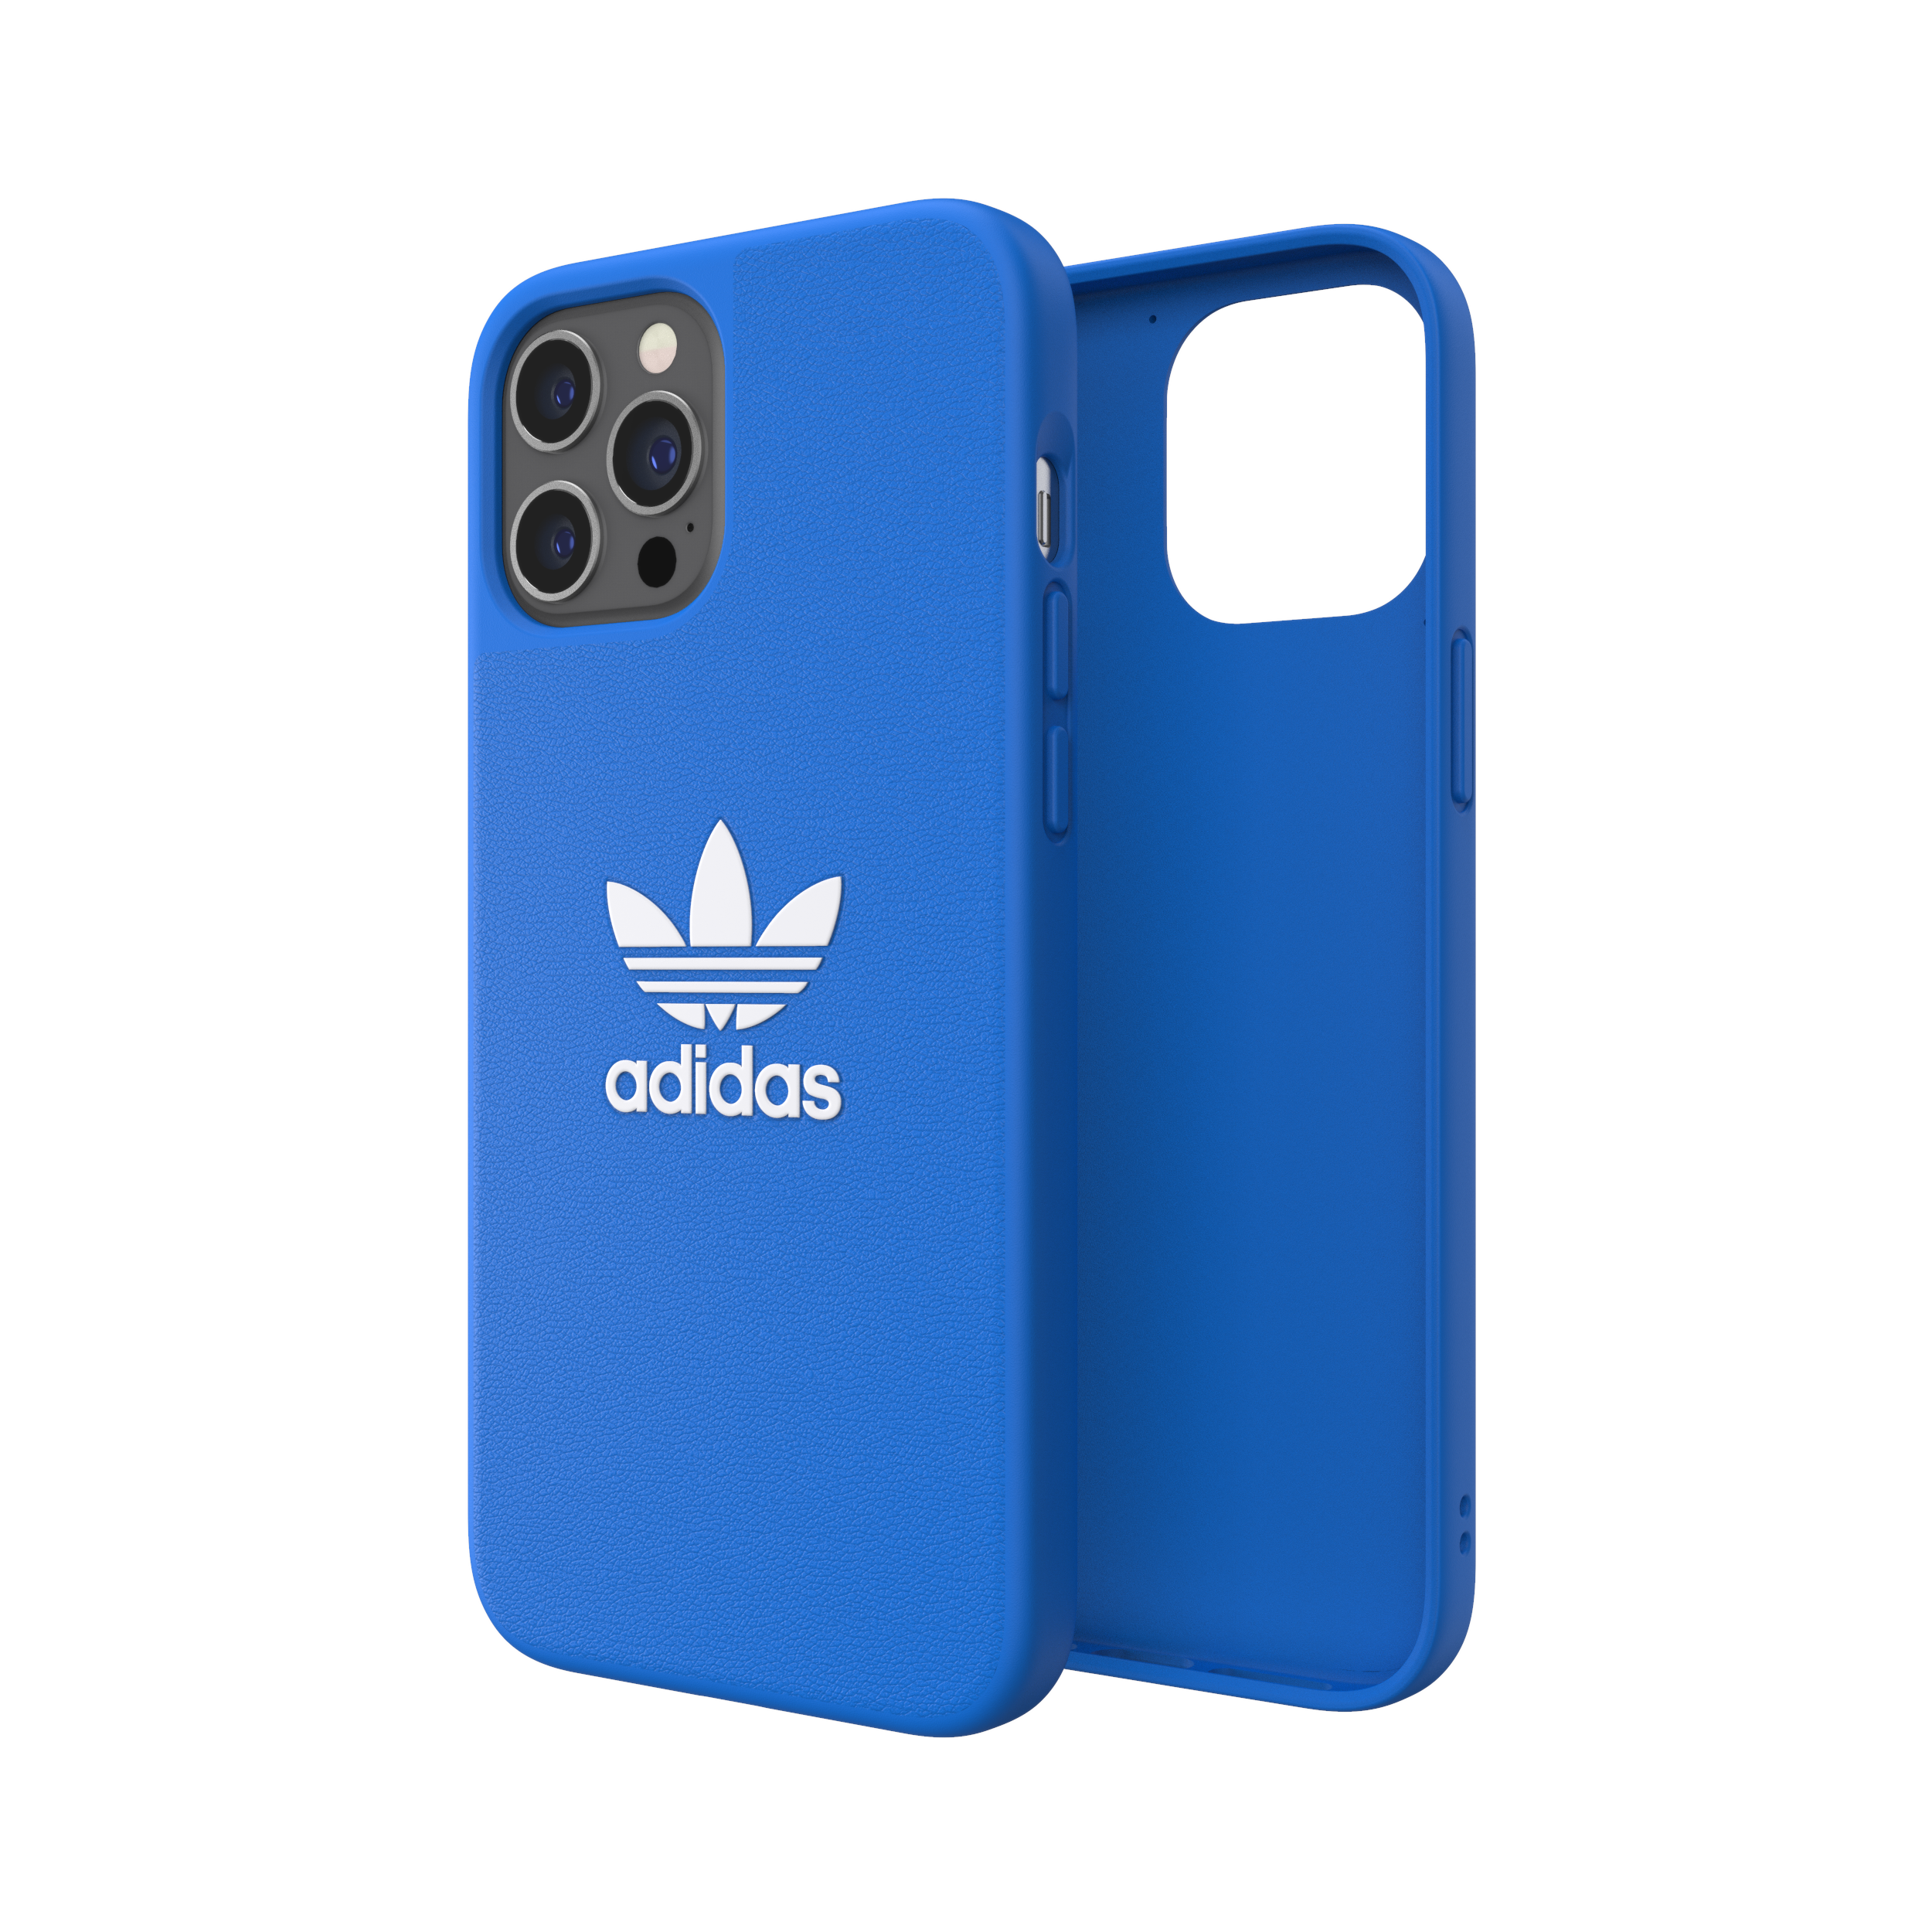 Adidas ORIGINALS Apple iPhone 12 Pro Max Basic Moulded Case - Back cover w/ Trefoil Design, Scratch & Drop Protection w/ TPU Bumper, Wireless Charging Compatible - Blue/White